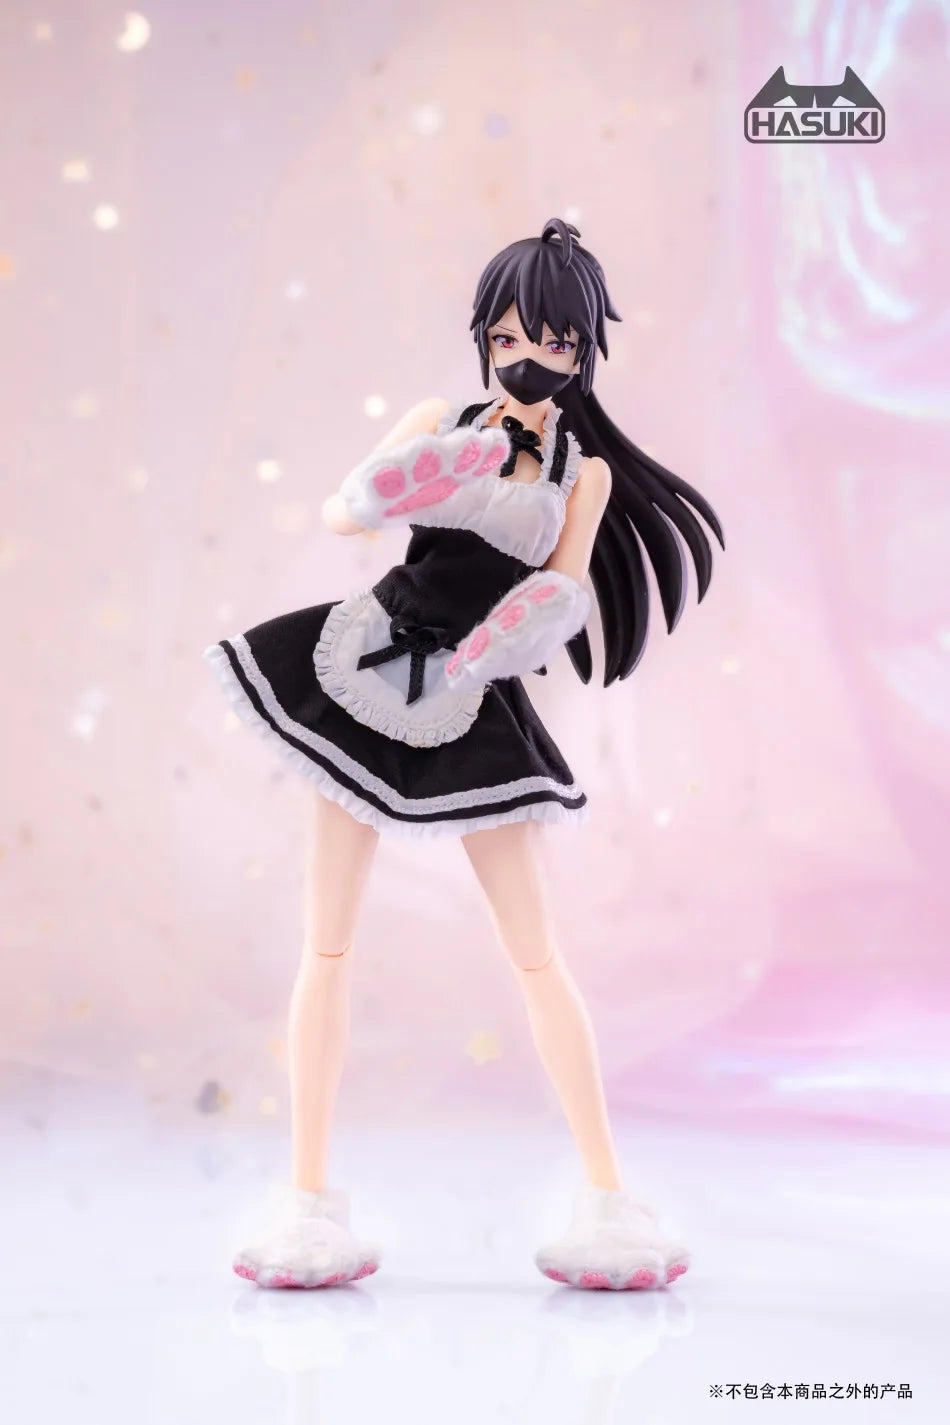 HASUKI 6" Anime Girl Action Figure Cat Maid Clothing & Accessories